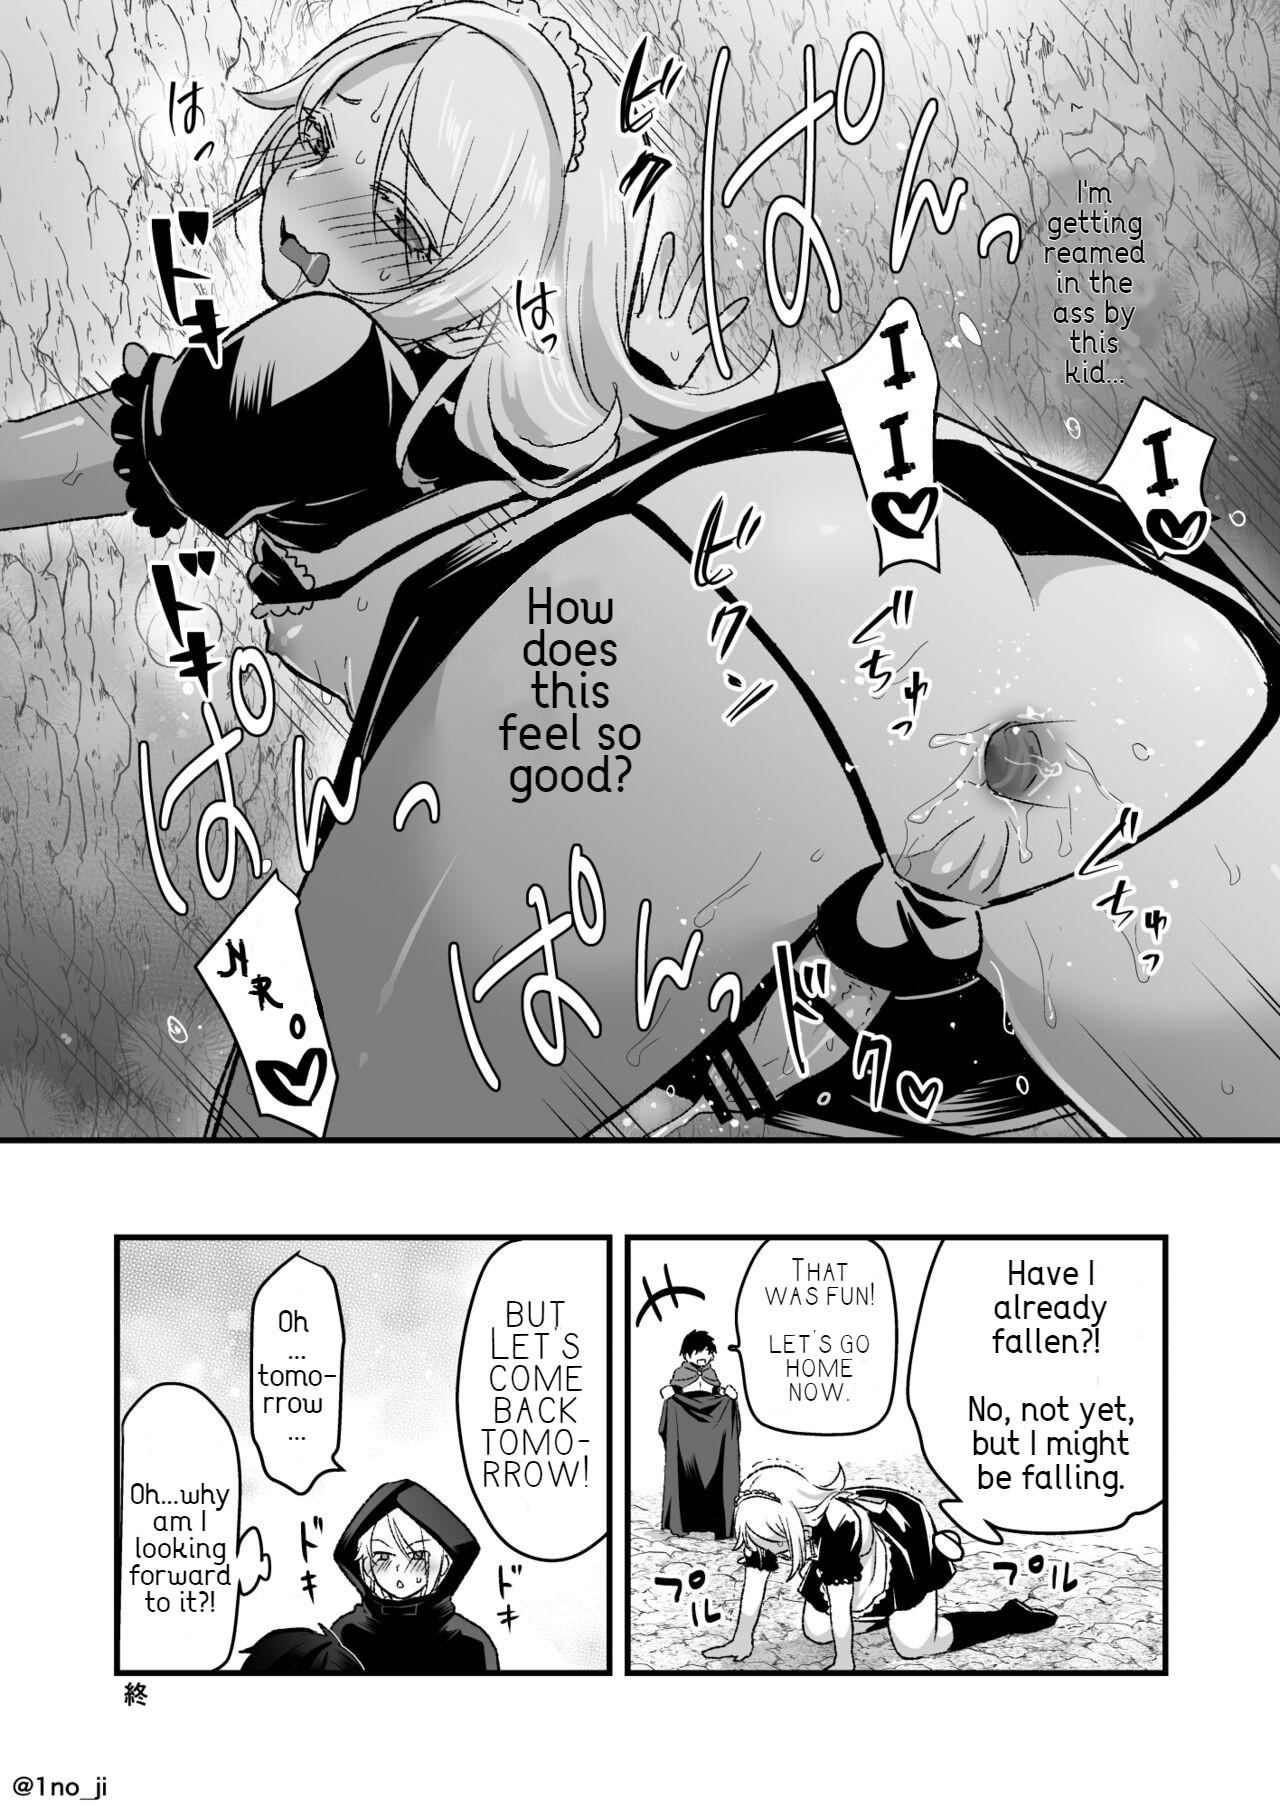 Ass Fucked Manga of the Strongest Shota and the Strong and Beautiful Onii-san 2 Asshole - Page 4